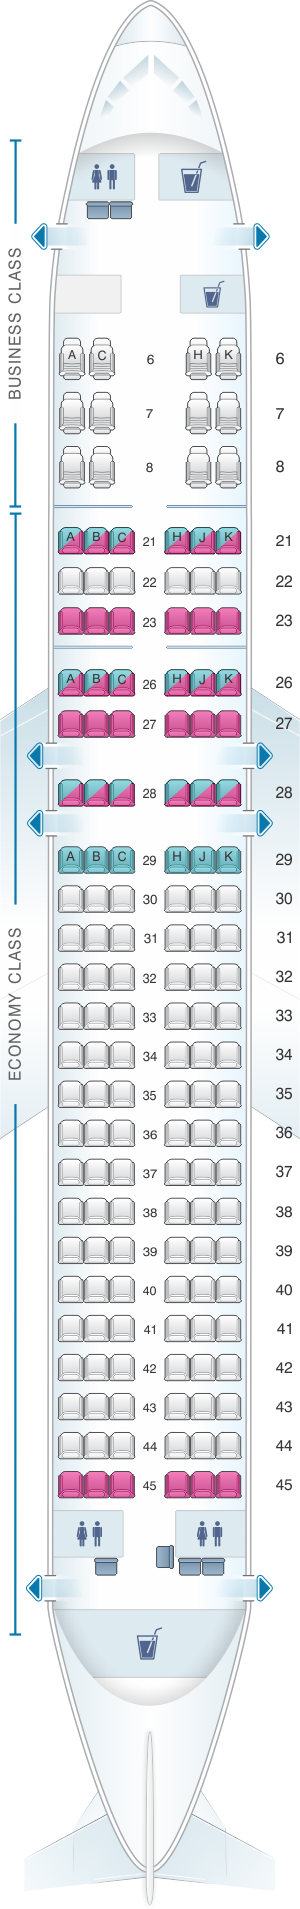 Seat map for Royal Brunei Airlines Airbus A320 Neo